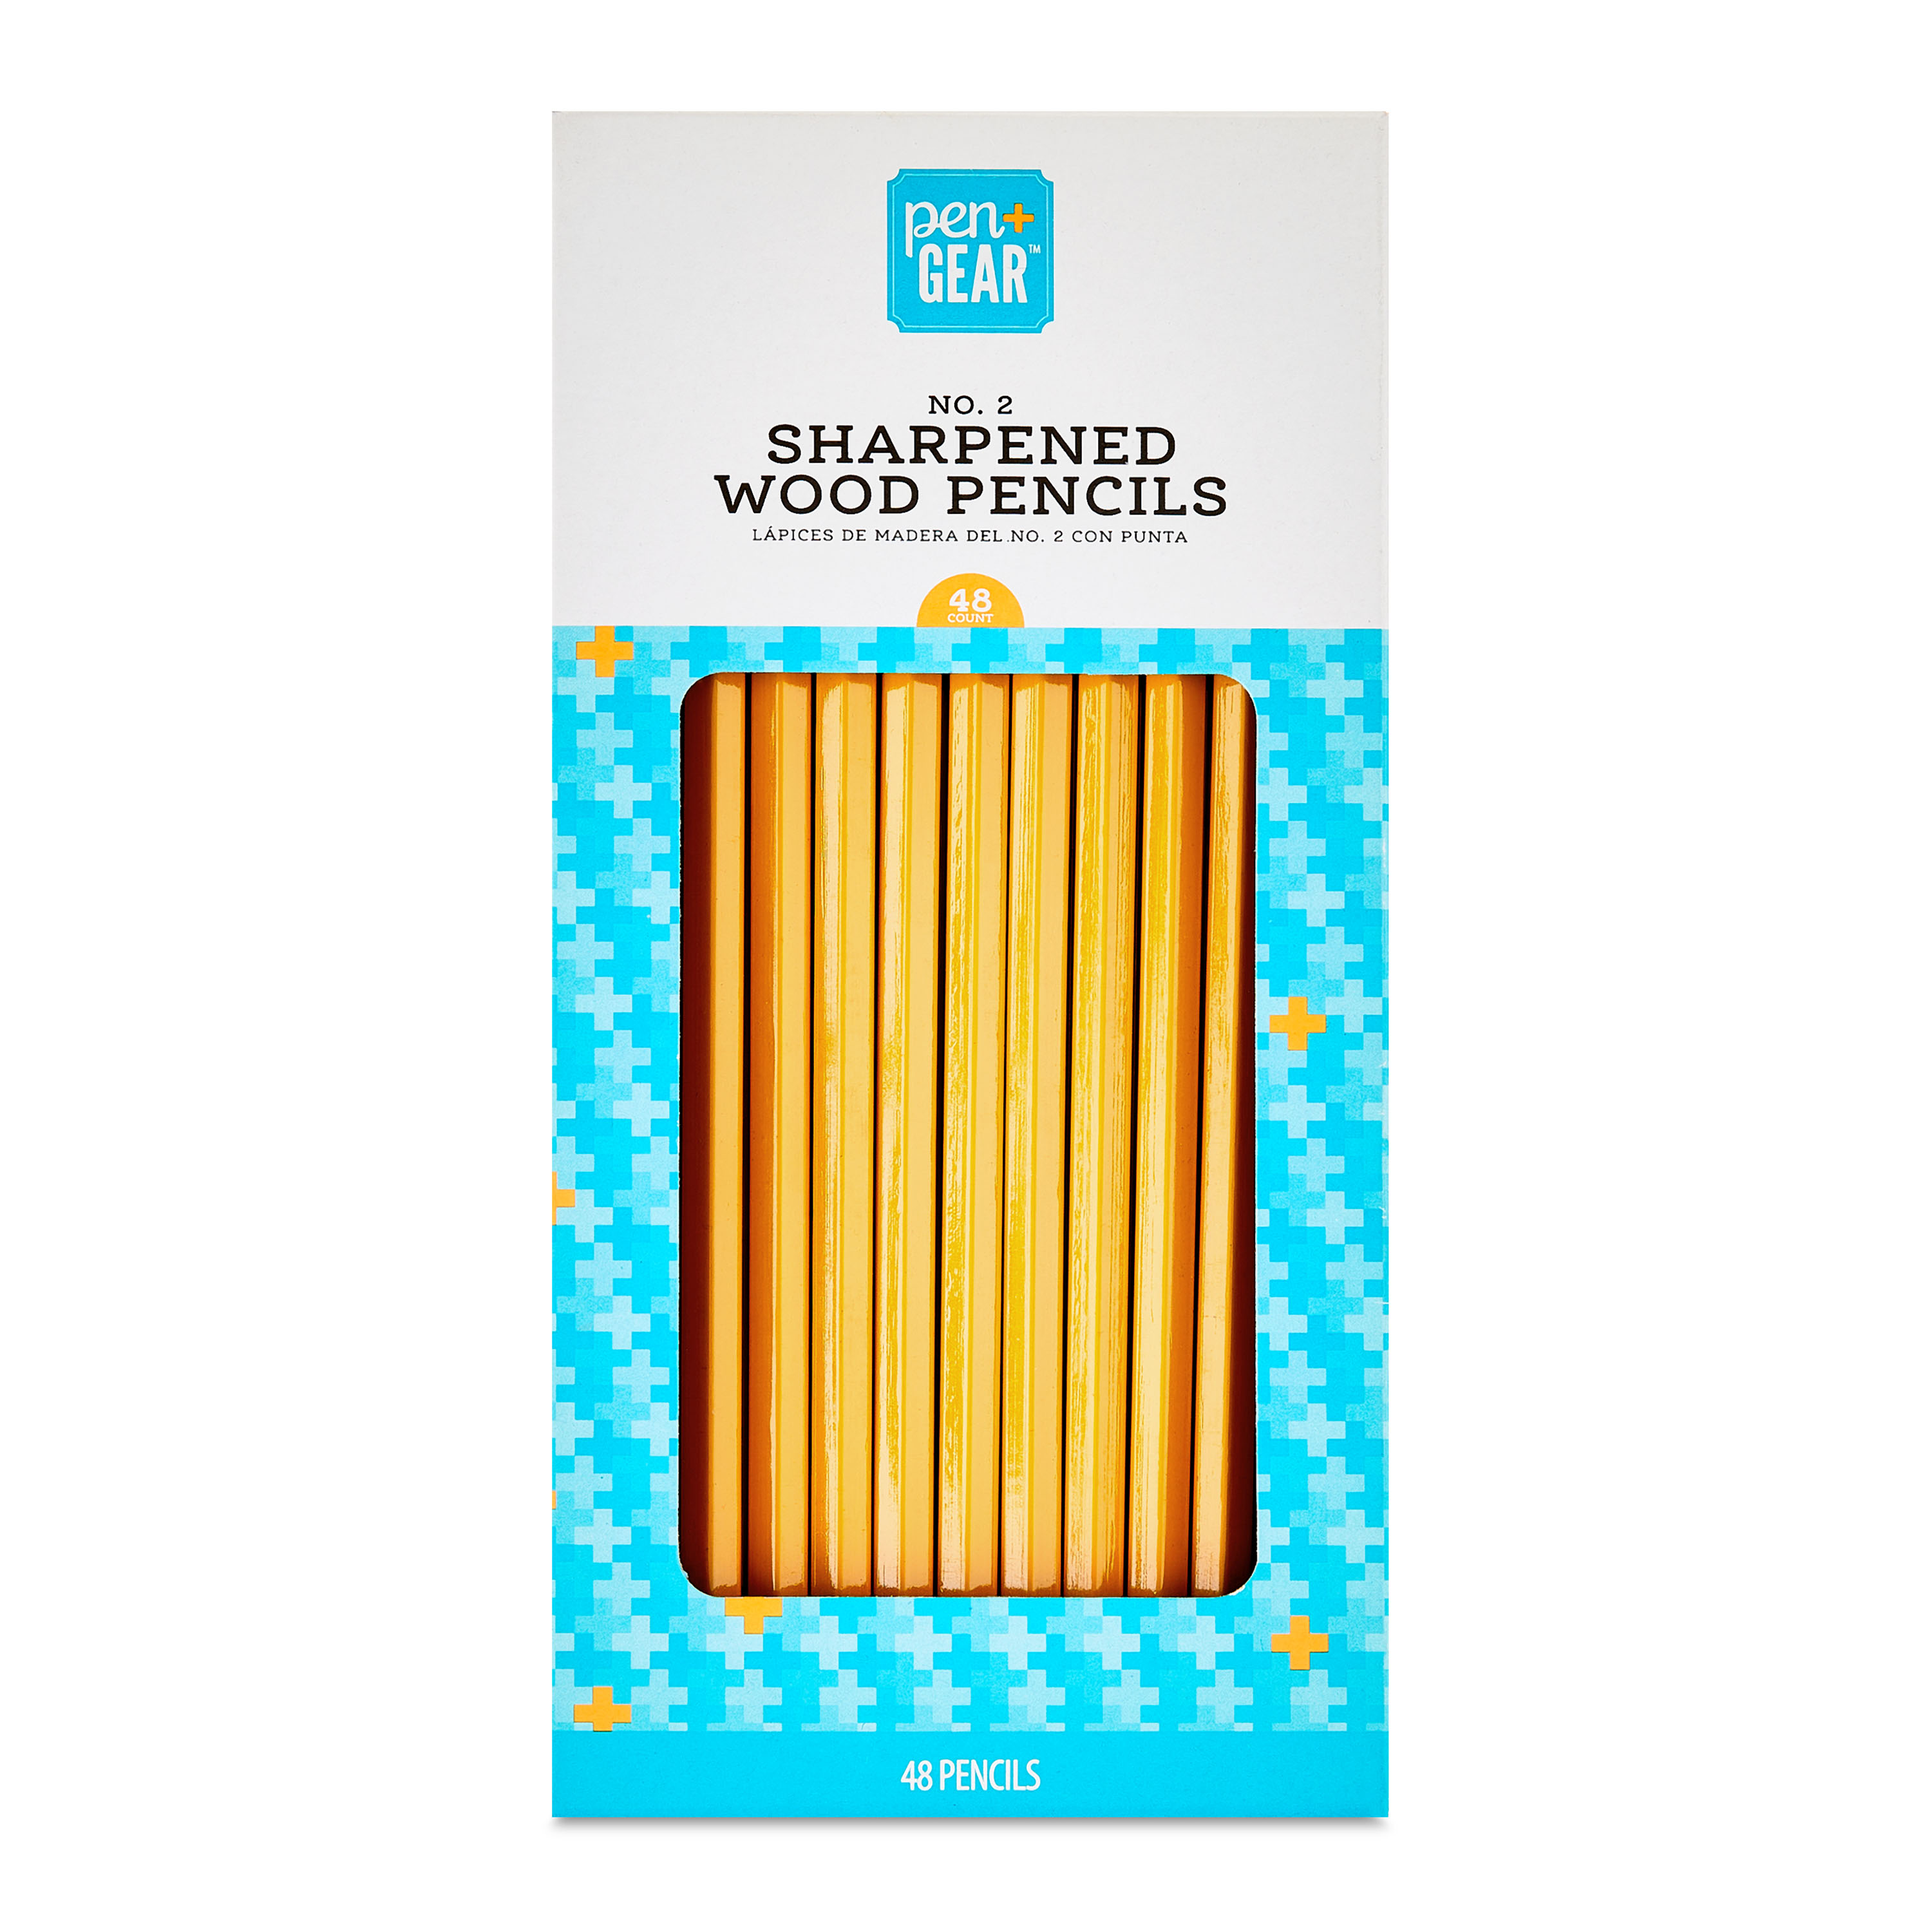 Pen+Gear No. 2 Wood Pencils, Sharpened, 48 Count - image 3 of 10